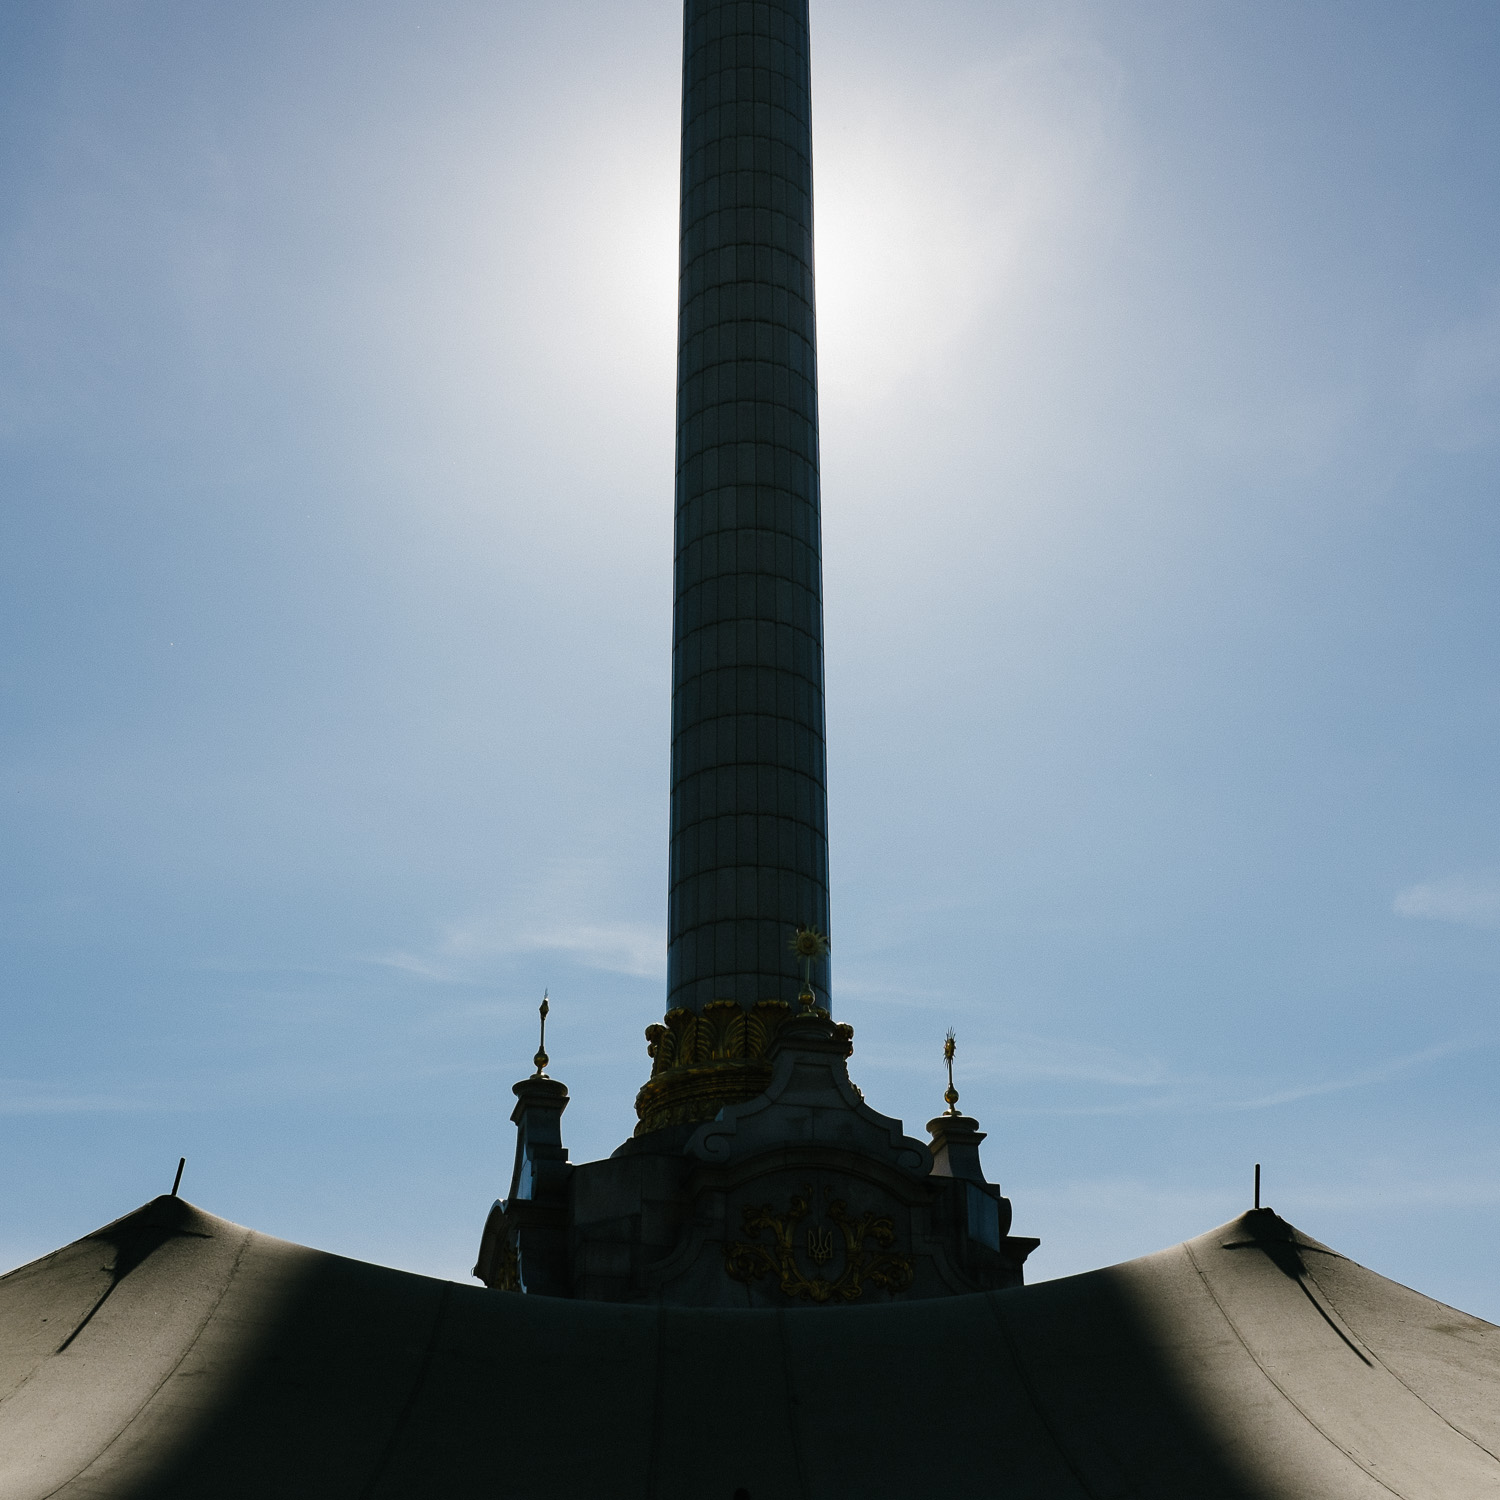  Tents pitched near the column of the monument to independence in Kyiv's Independence Square, April 2014. 